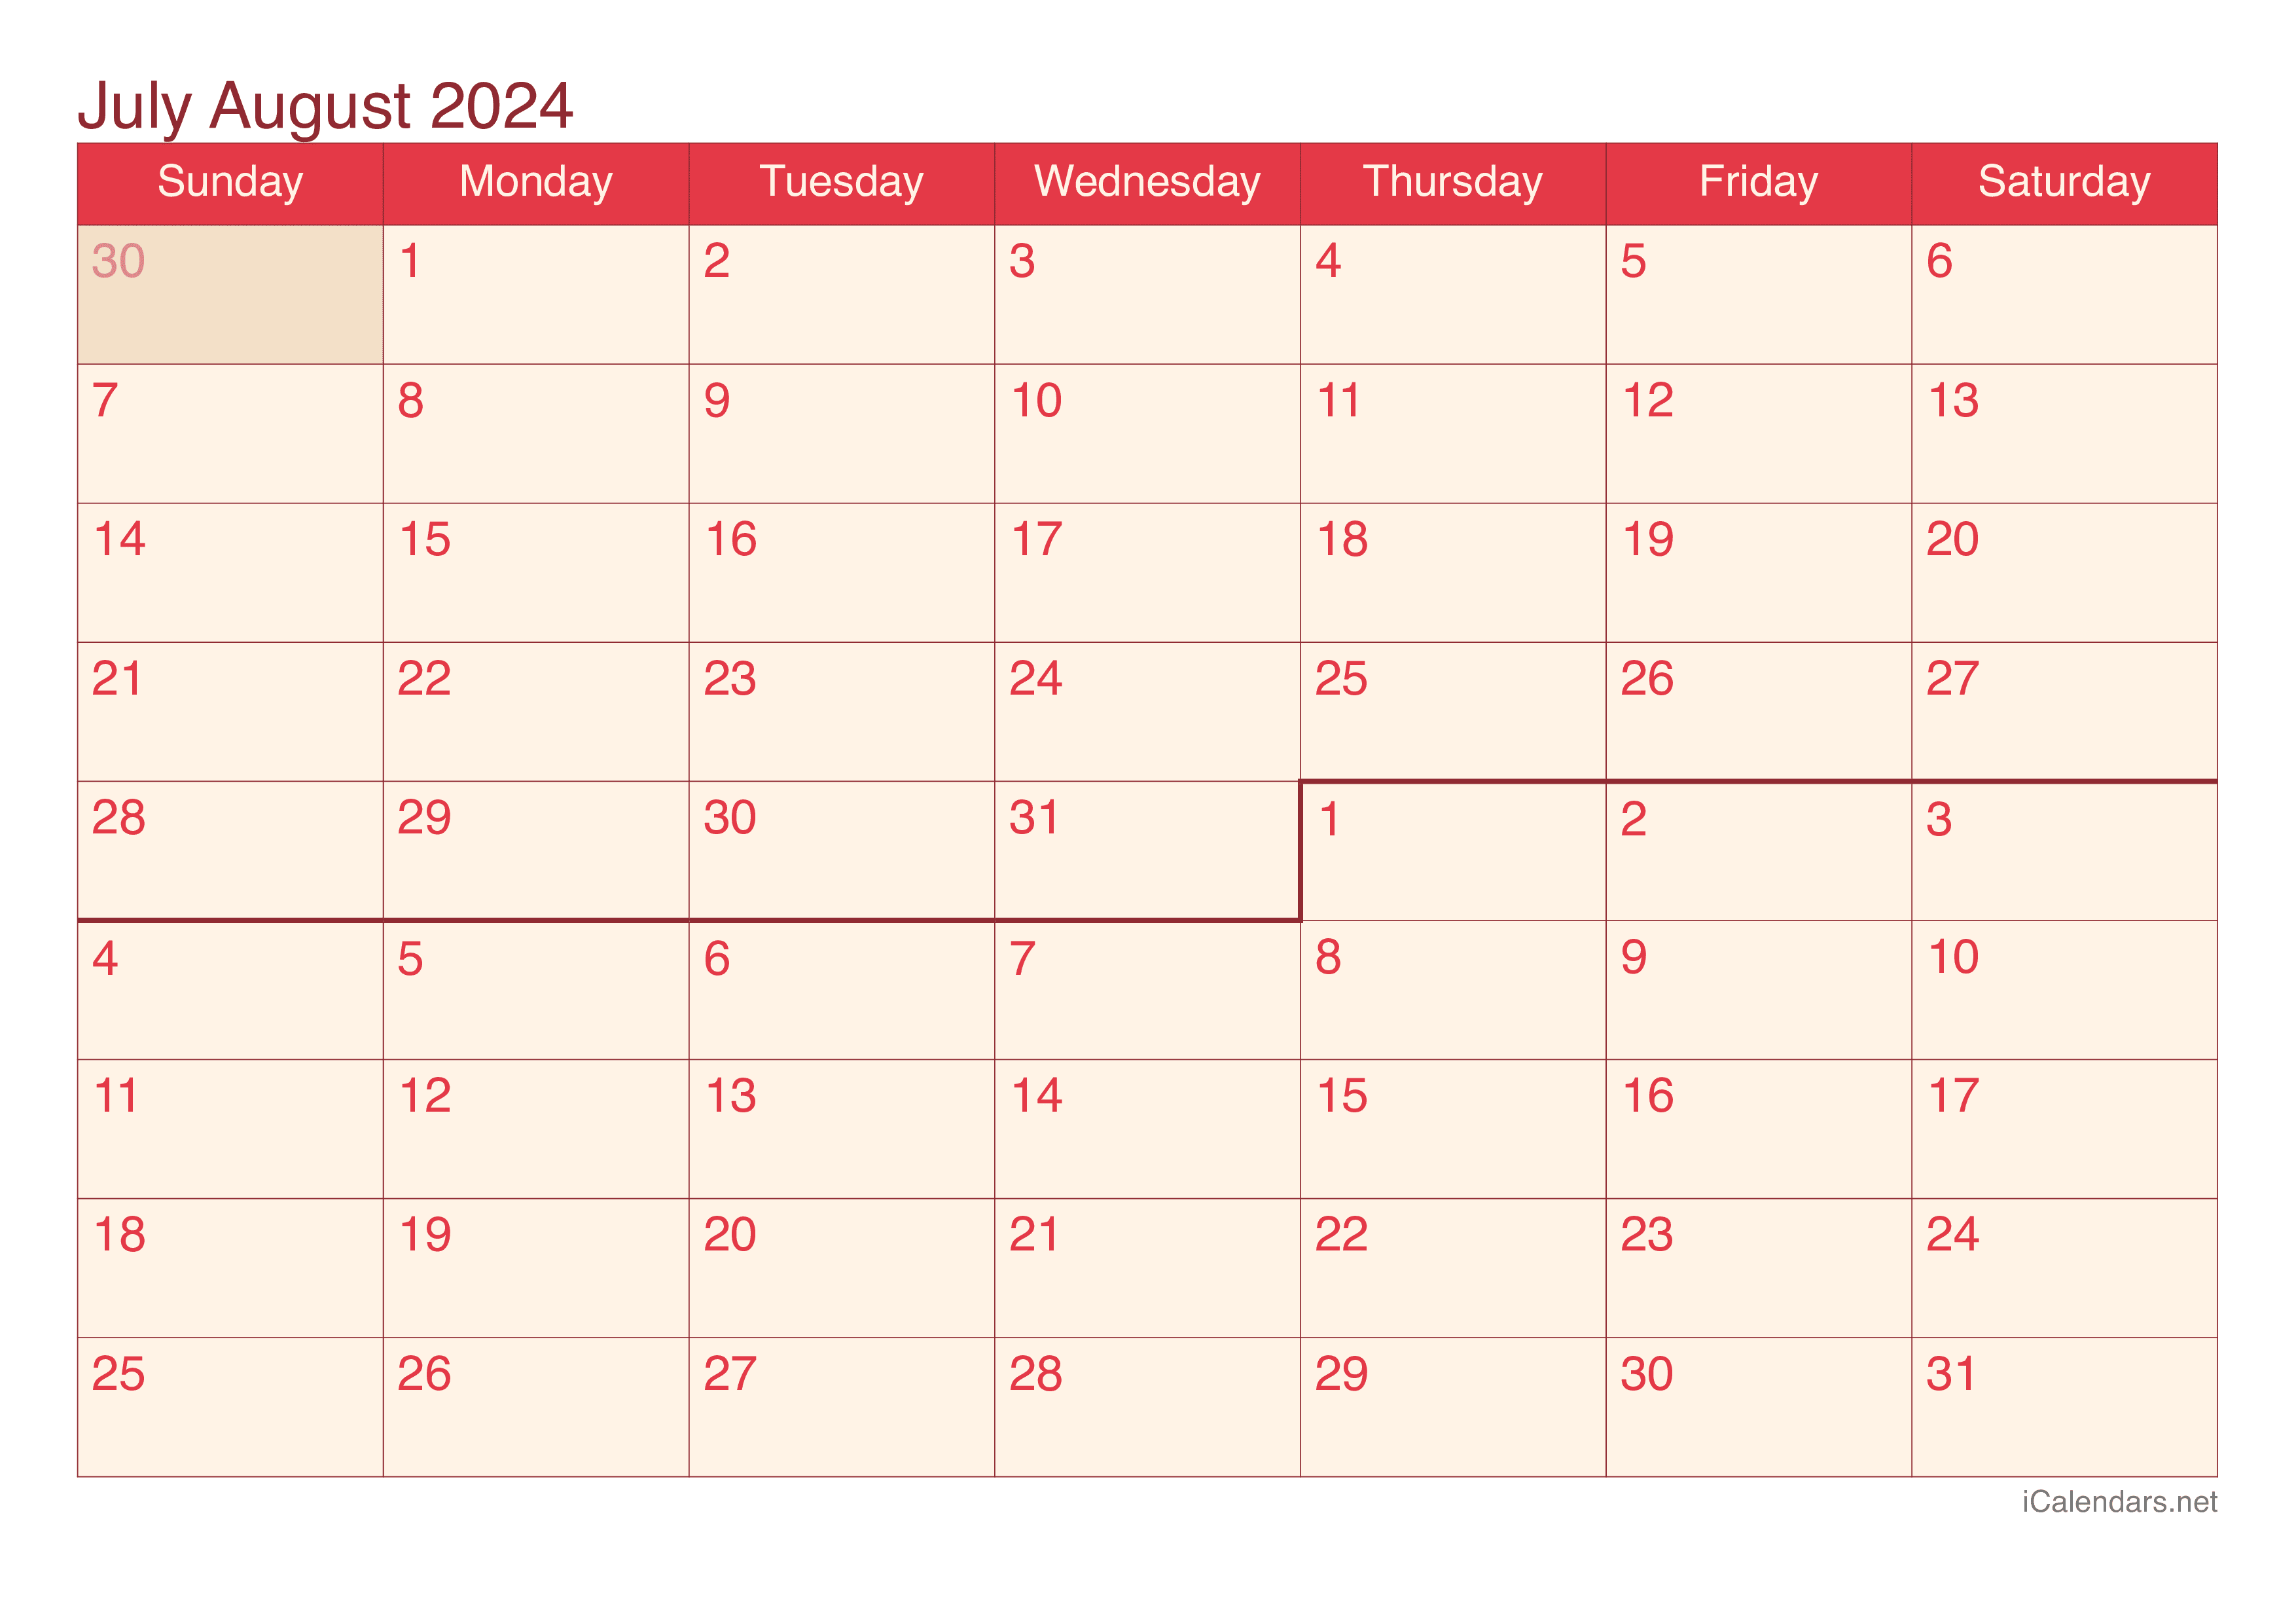 July And August 2024 Printable Calendar intended for Blank Calendar July And August 2024